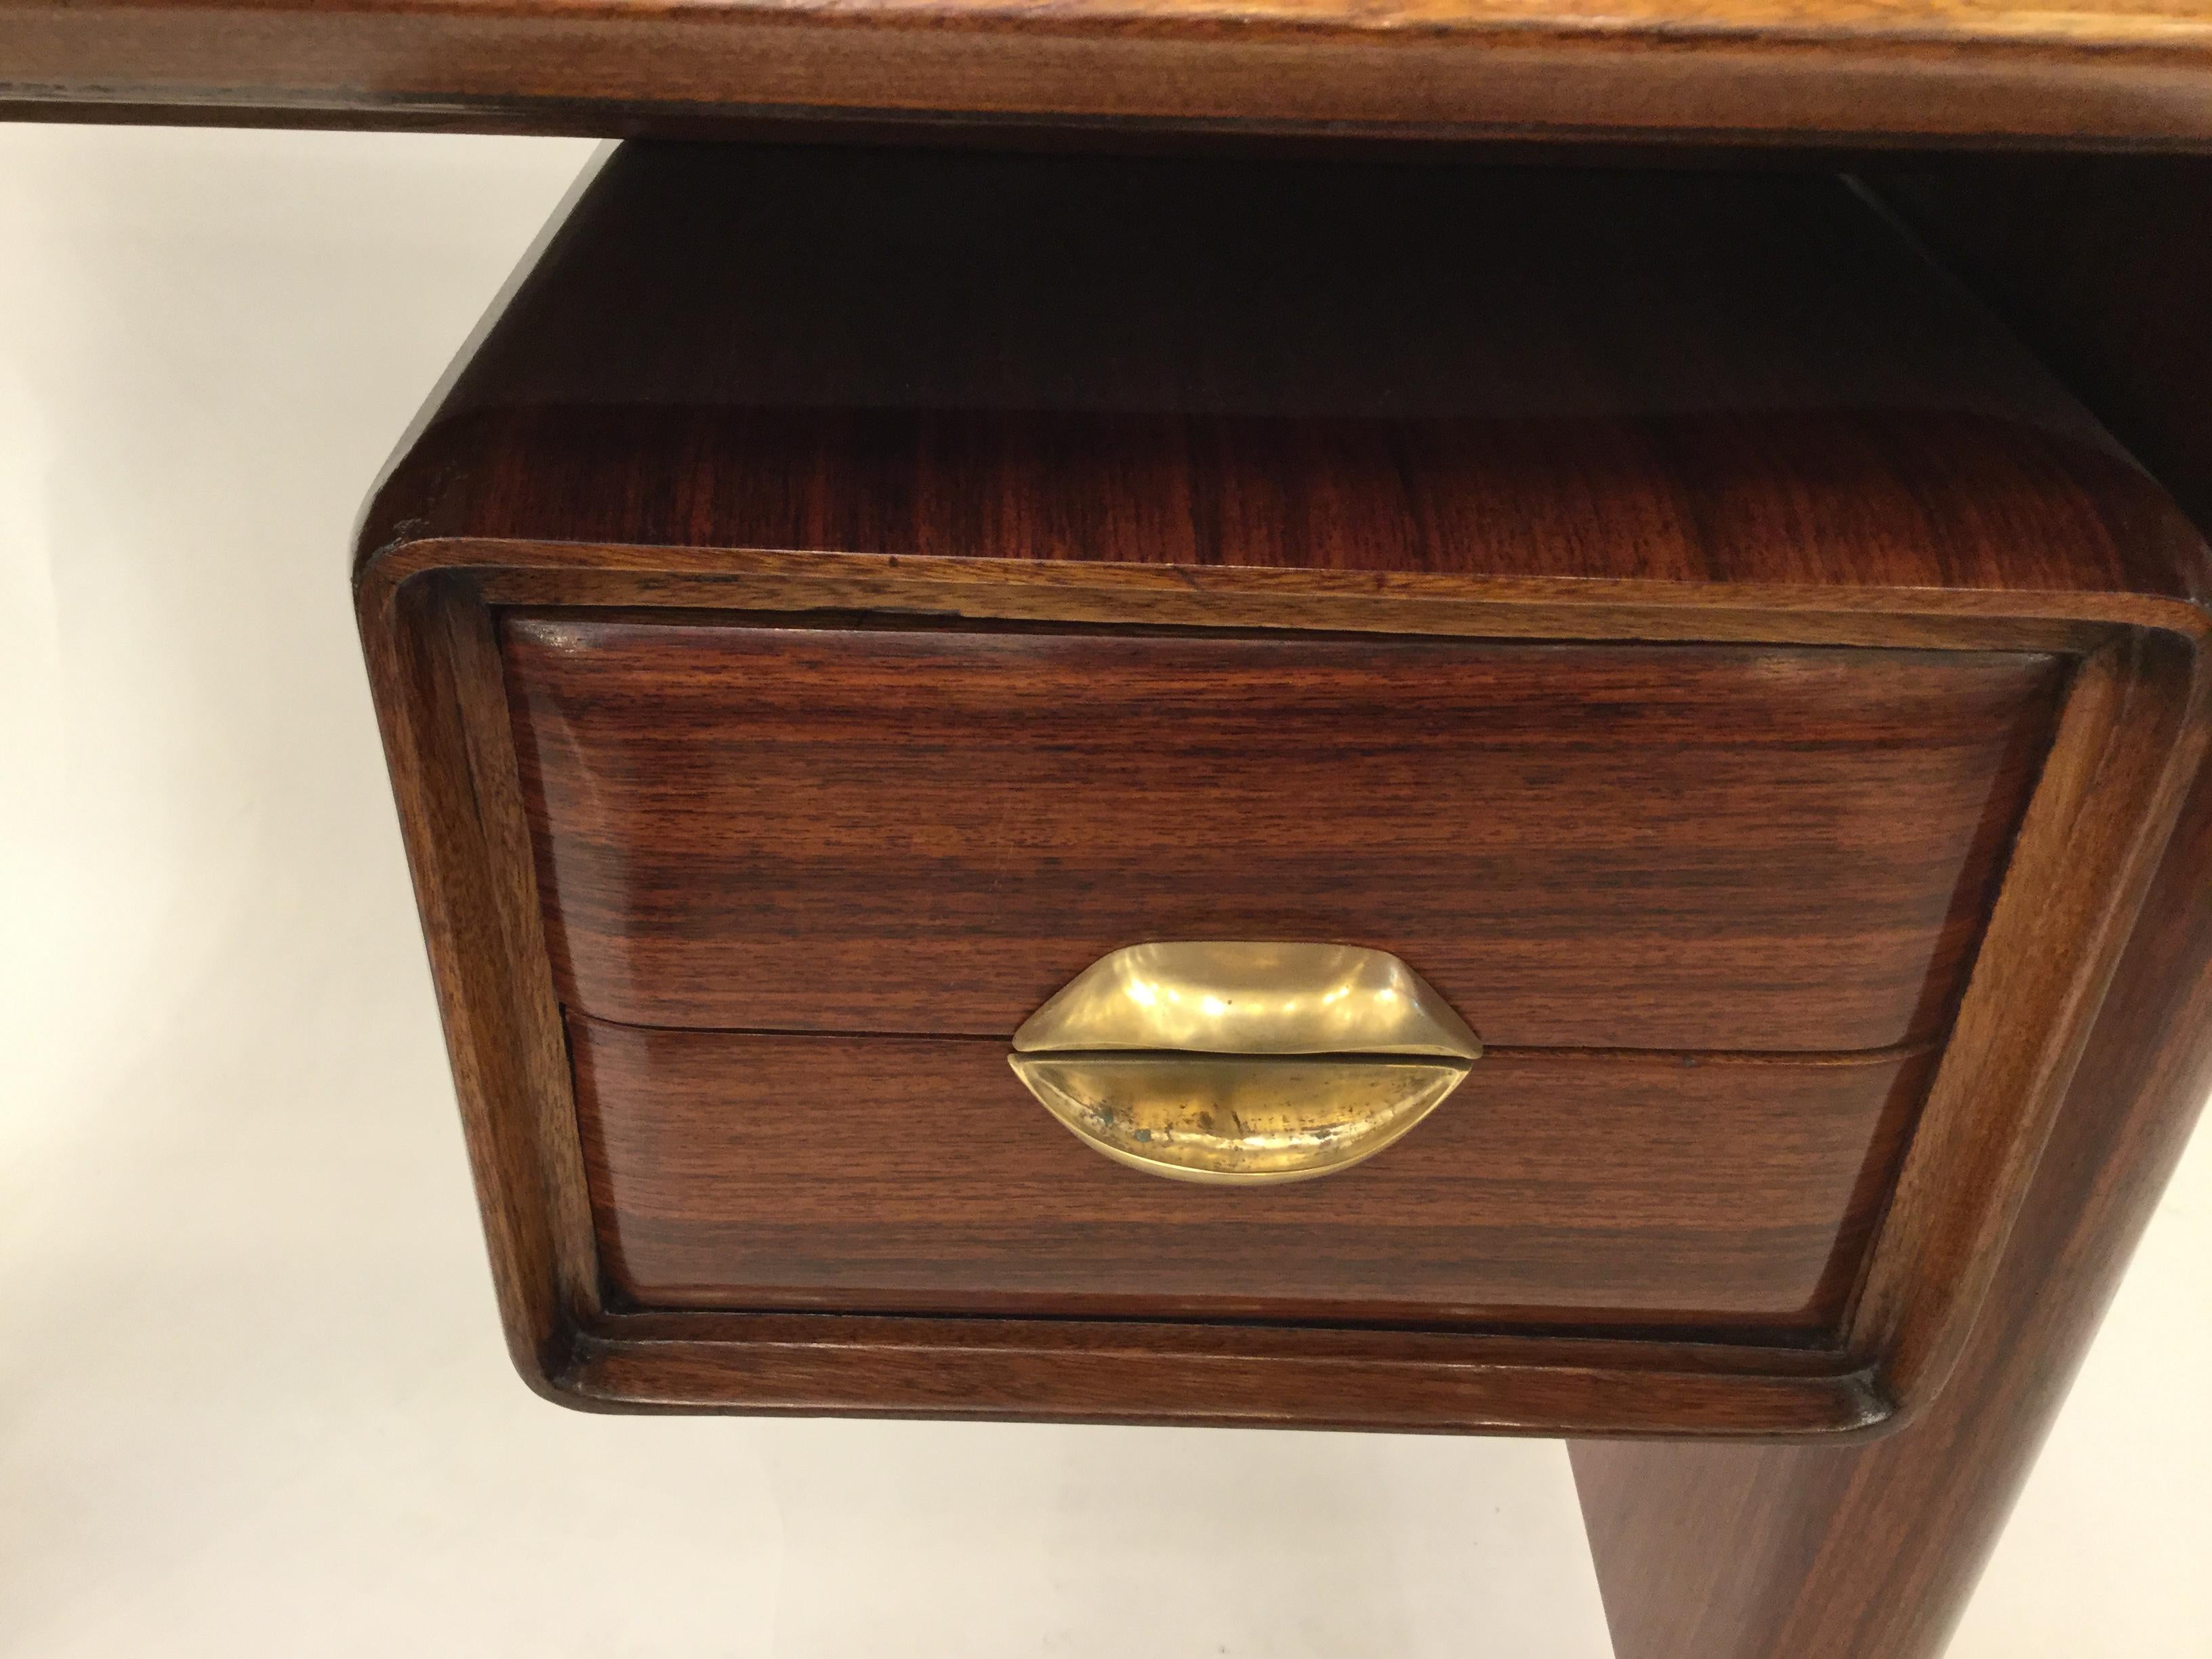 Small writing desk designed by Vittorio Dassi. It has a solid solid structure supported by conic brass feet and two drawers with beautiful handles